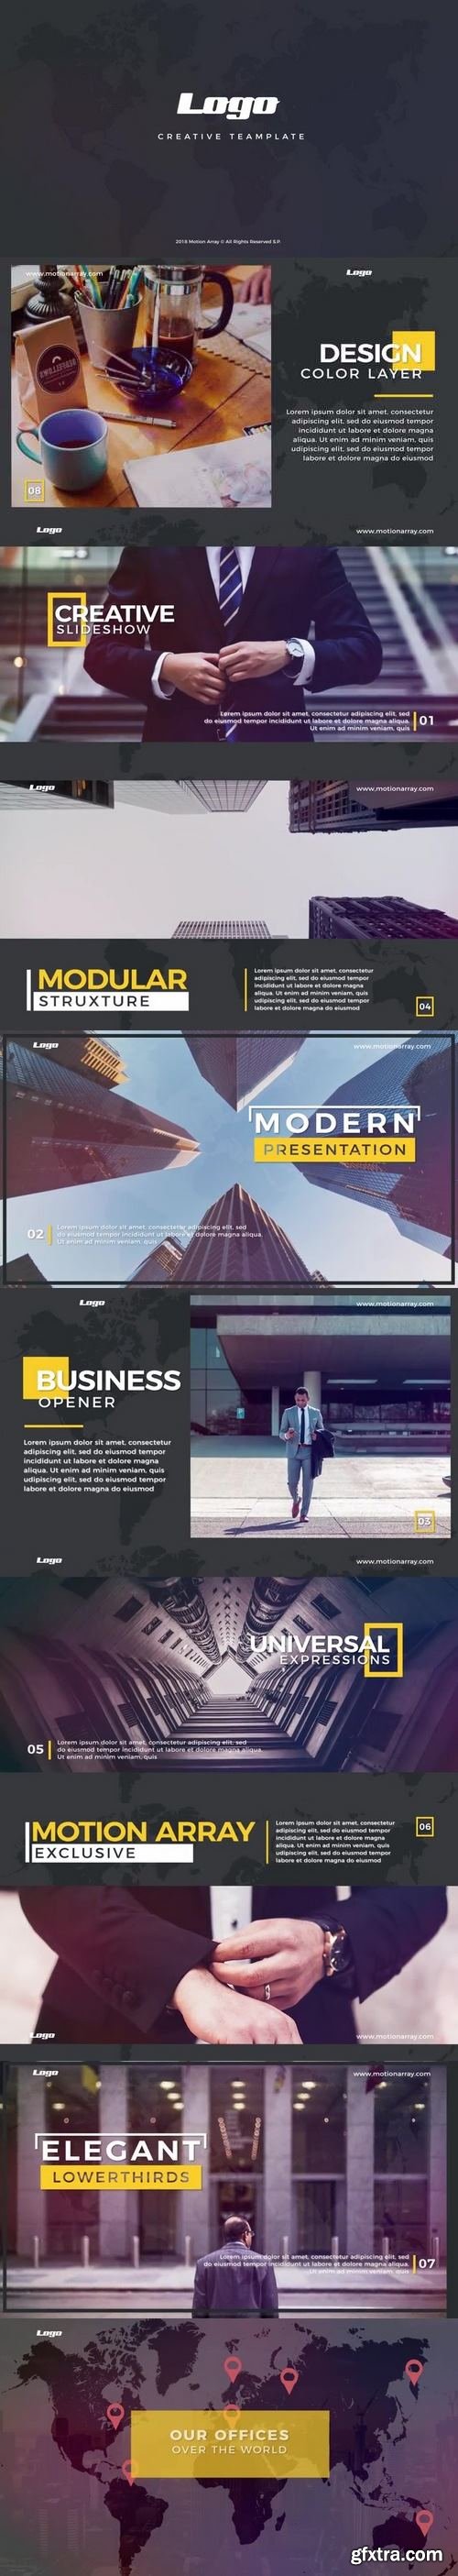 MotionArray - World Corporate Opener Production After Effects Templates 58774